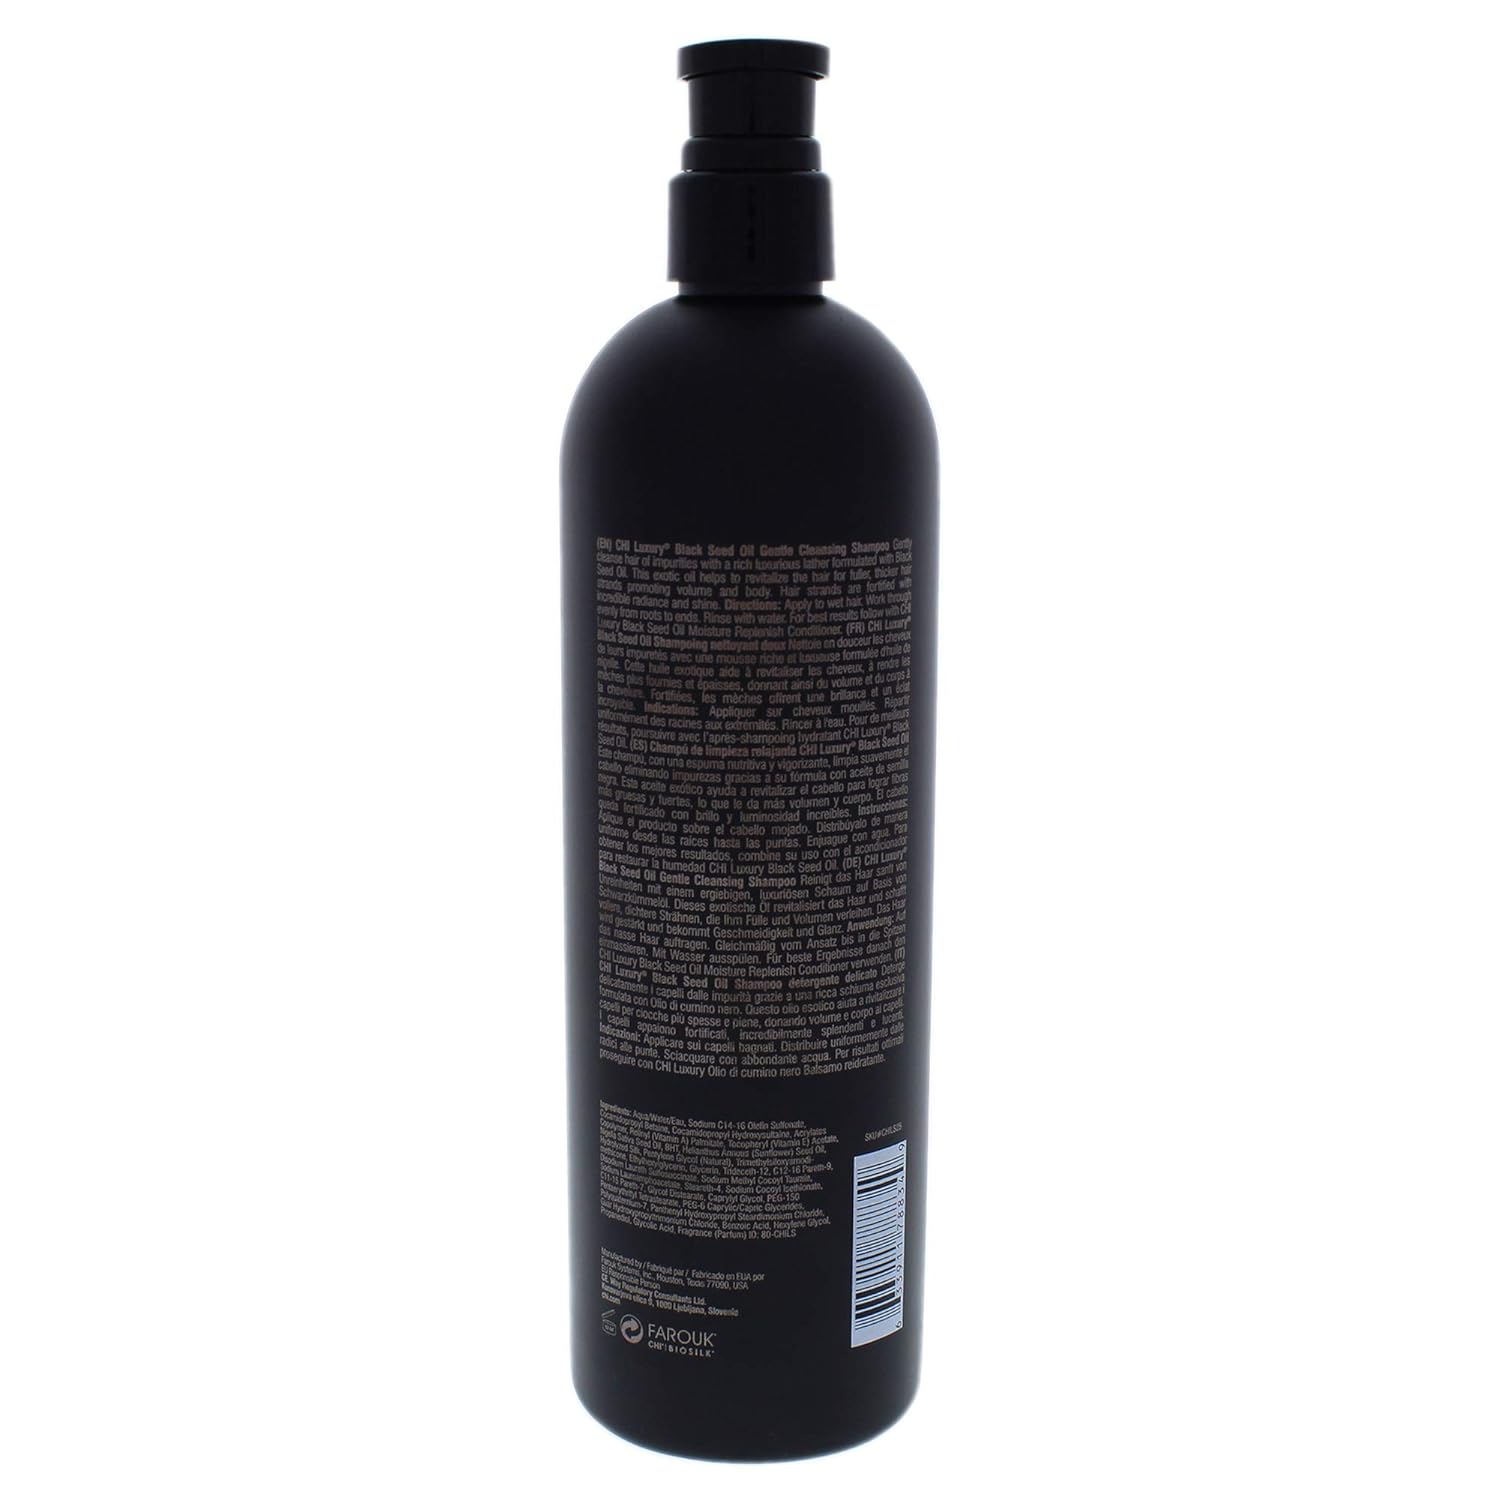 CHI Luxury Black Seed Oil Gentle Cleansing Shampoo, 25 Fl Oz : Beauty & Personal Care